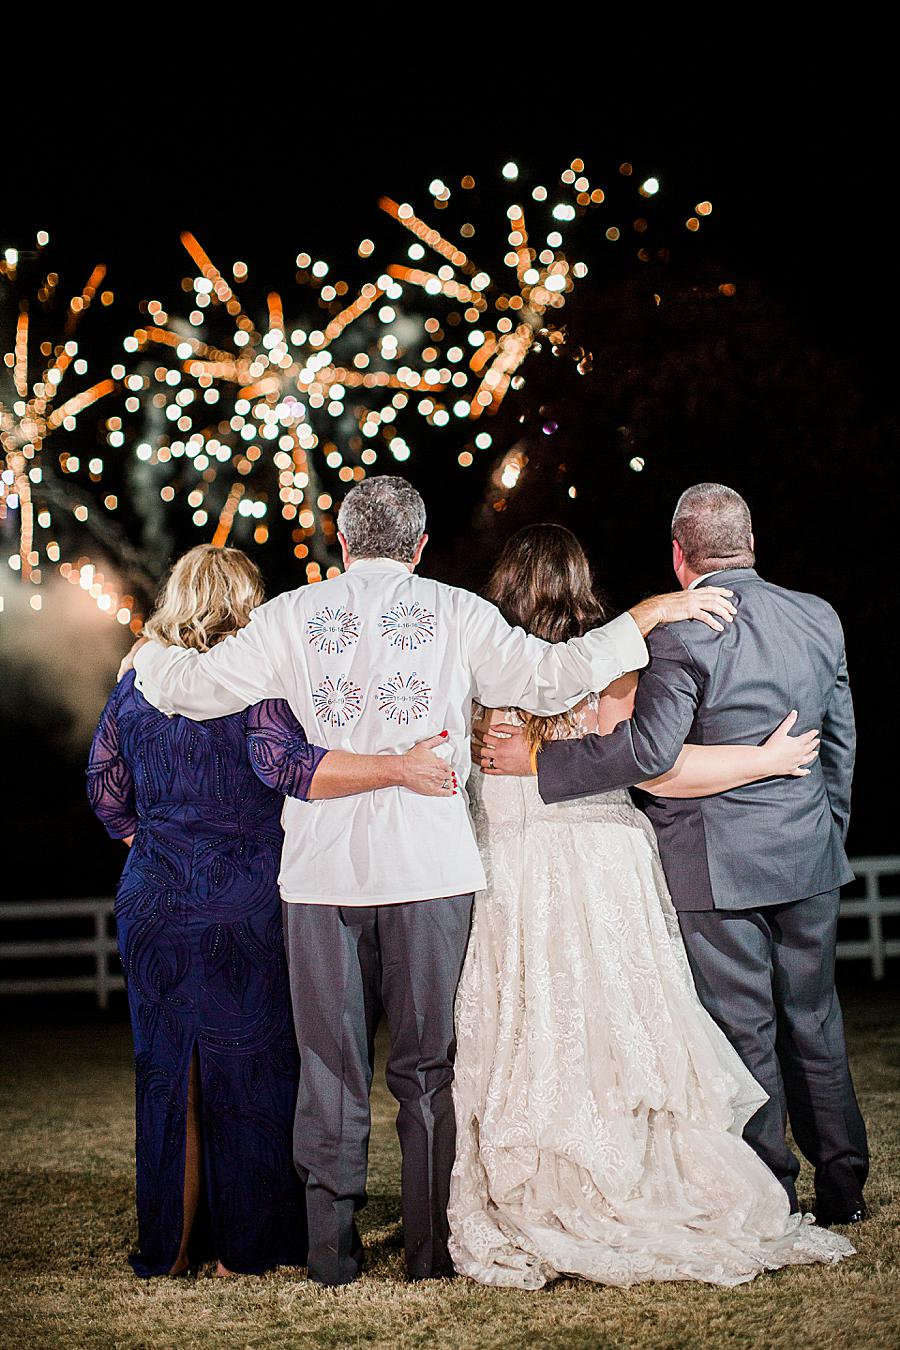 Watching fireworks by Knoxville Wedding Photographer, Amanda May Photos.